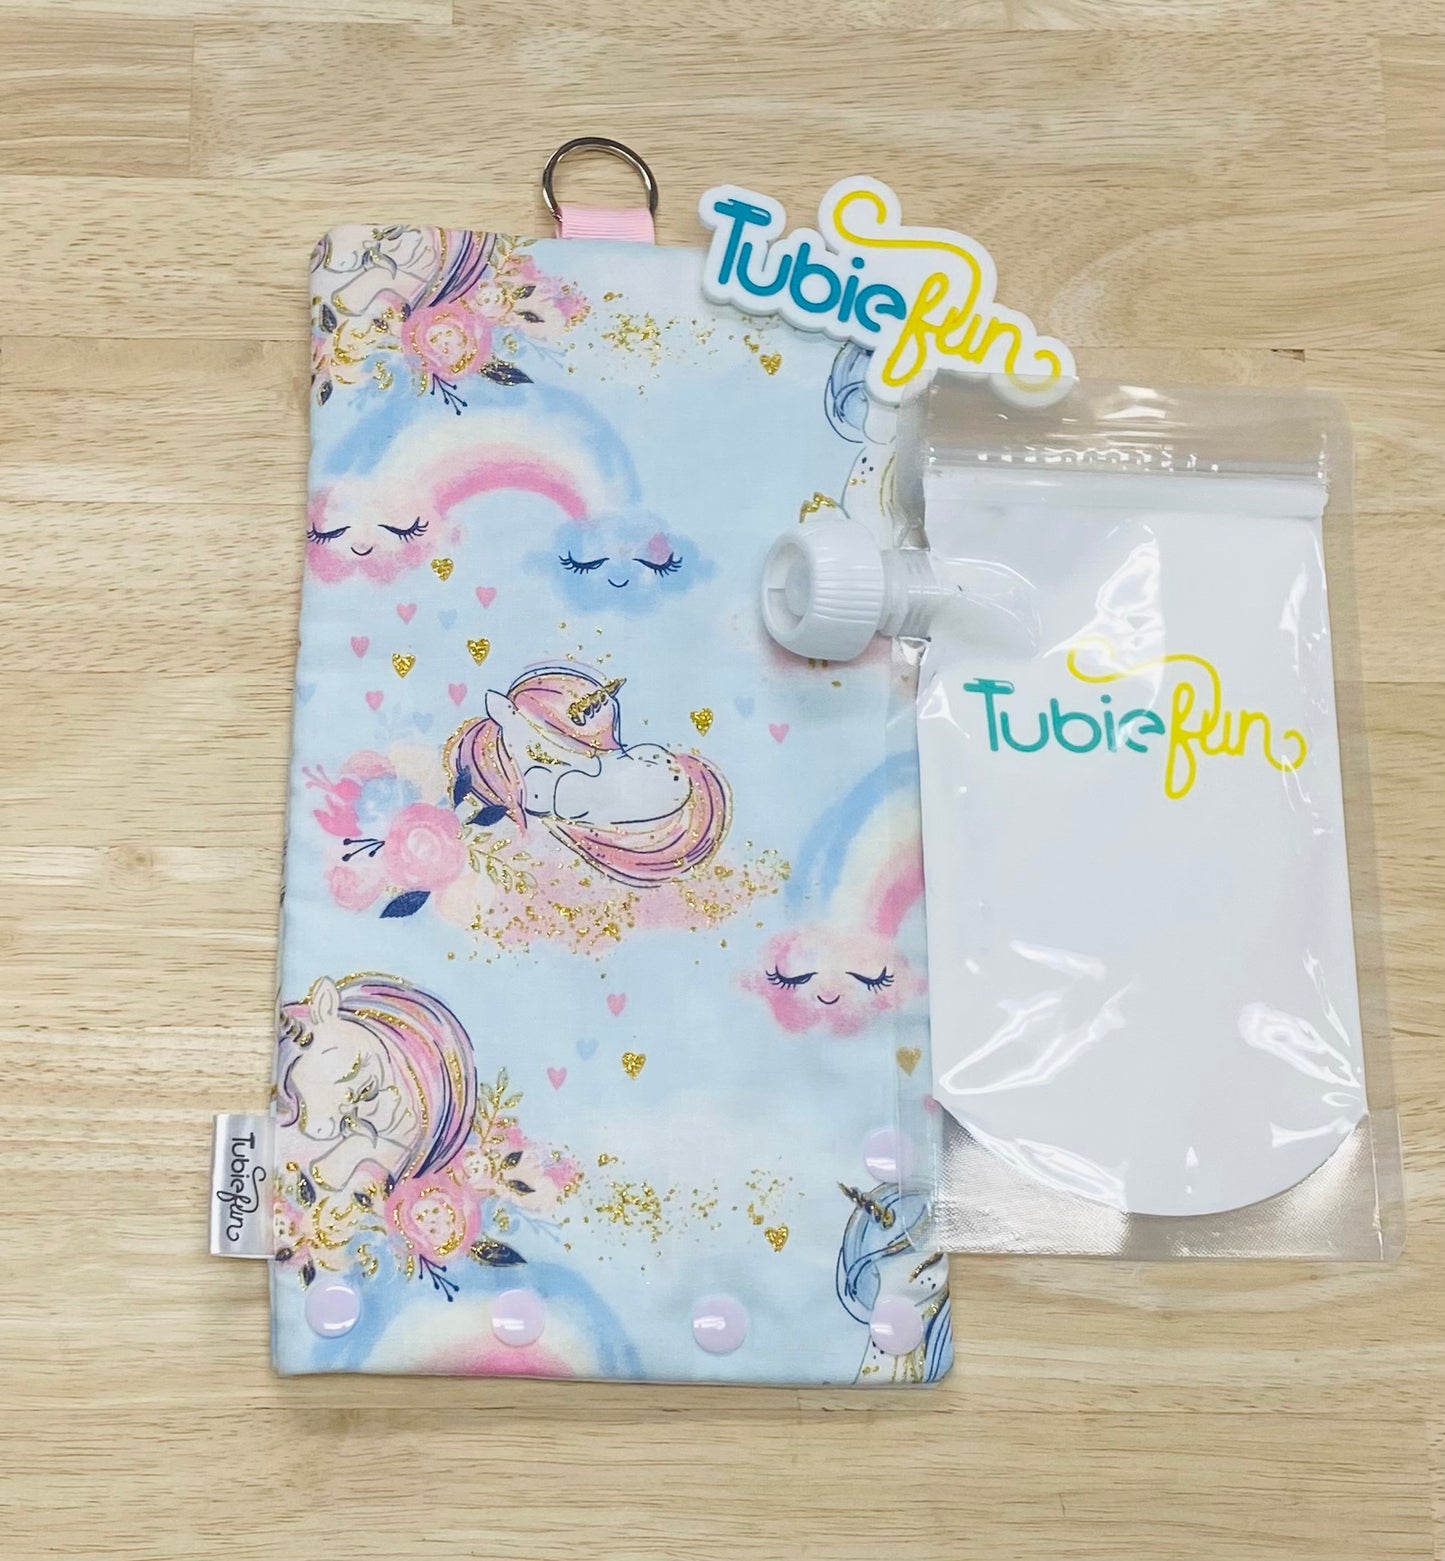 Insulated Milk Bag Suitable for Tubie Fun 500ml Reusable Pouches - Unicorns with gold glitter